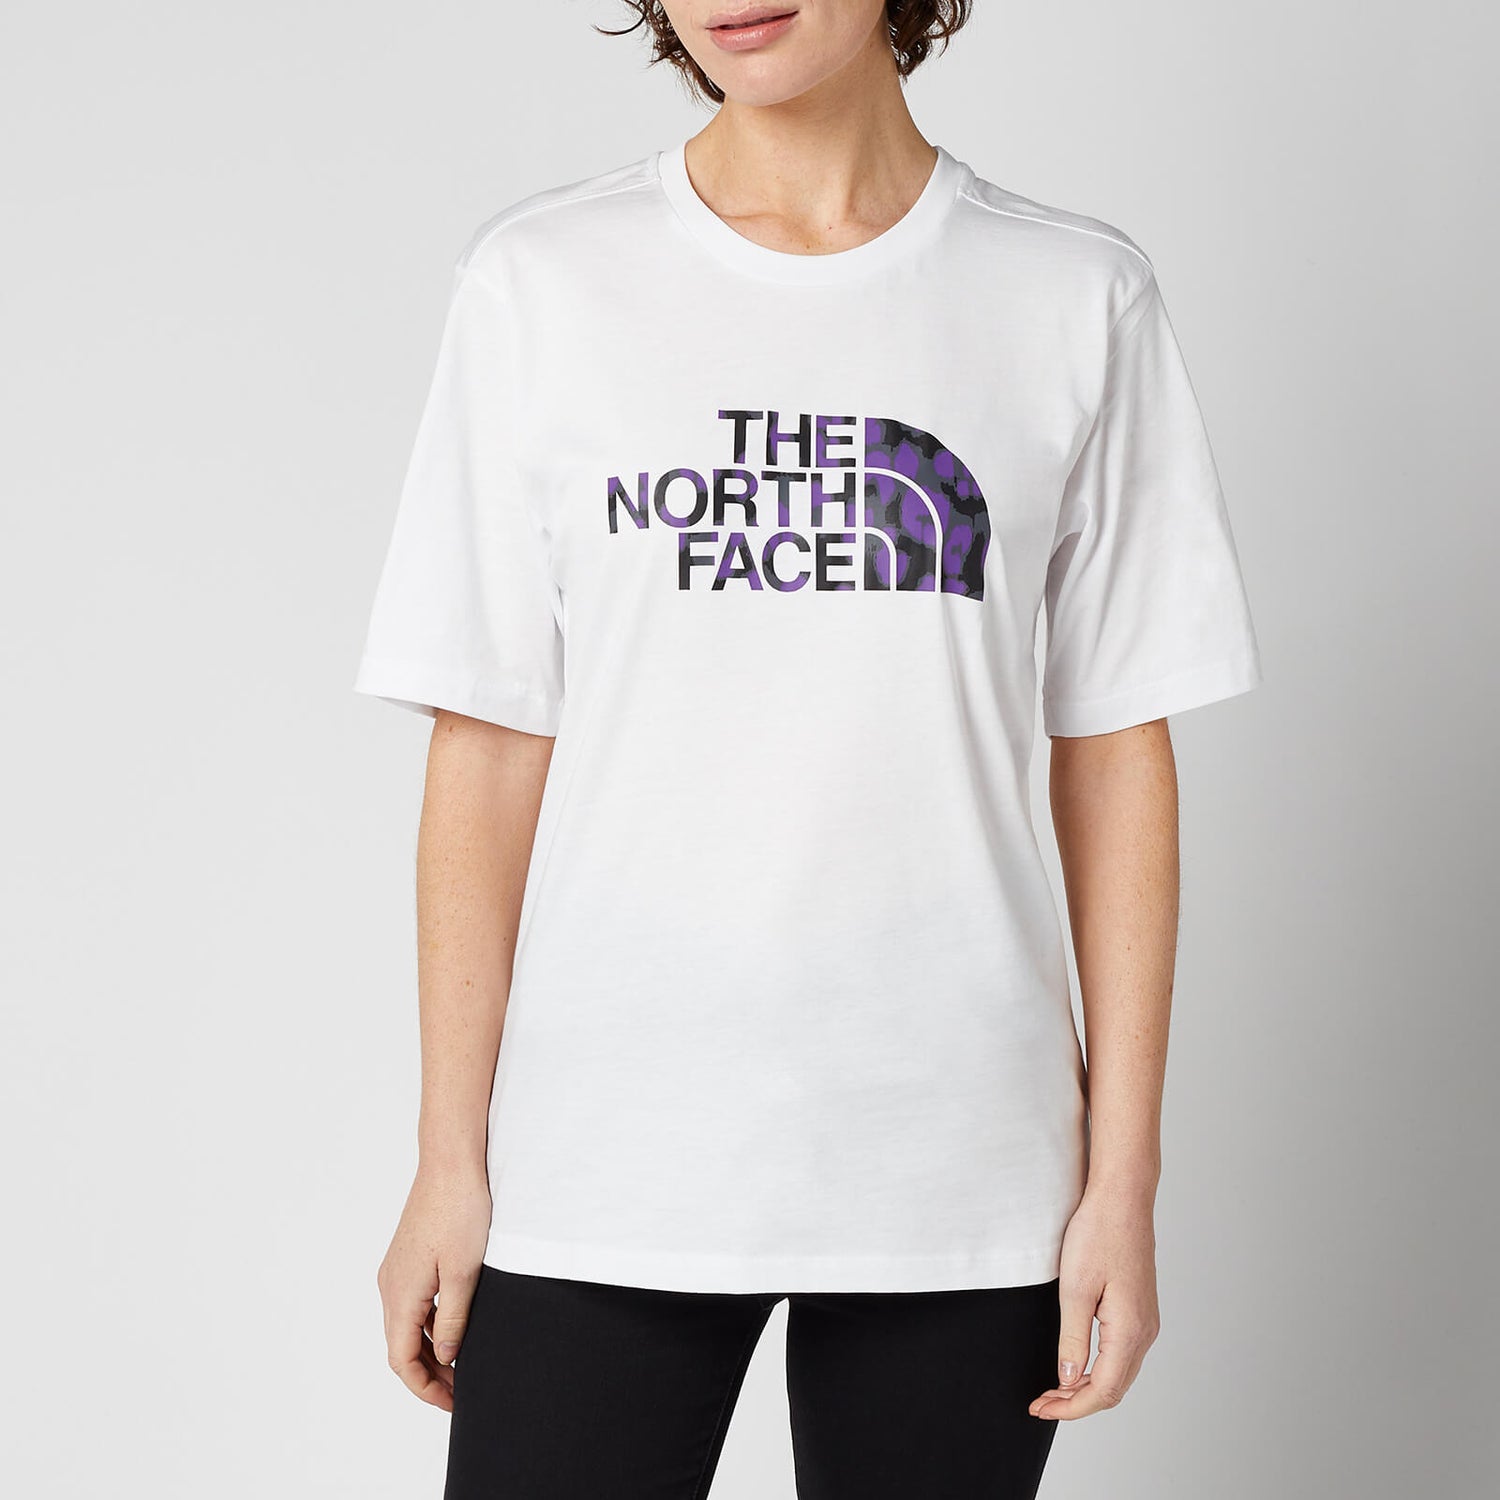 The North Face Women's Bf Easy T-Shirt - White/Purple